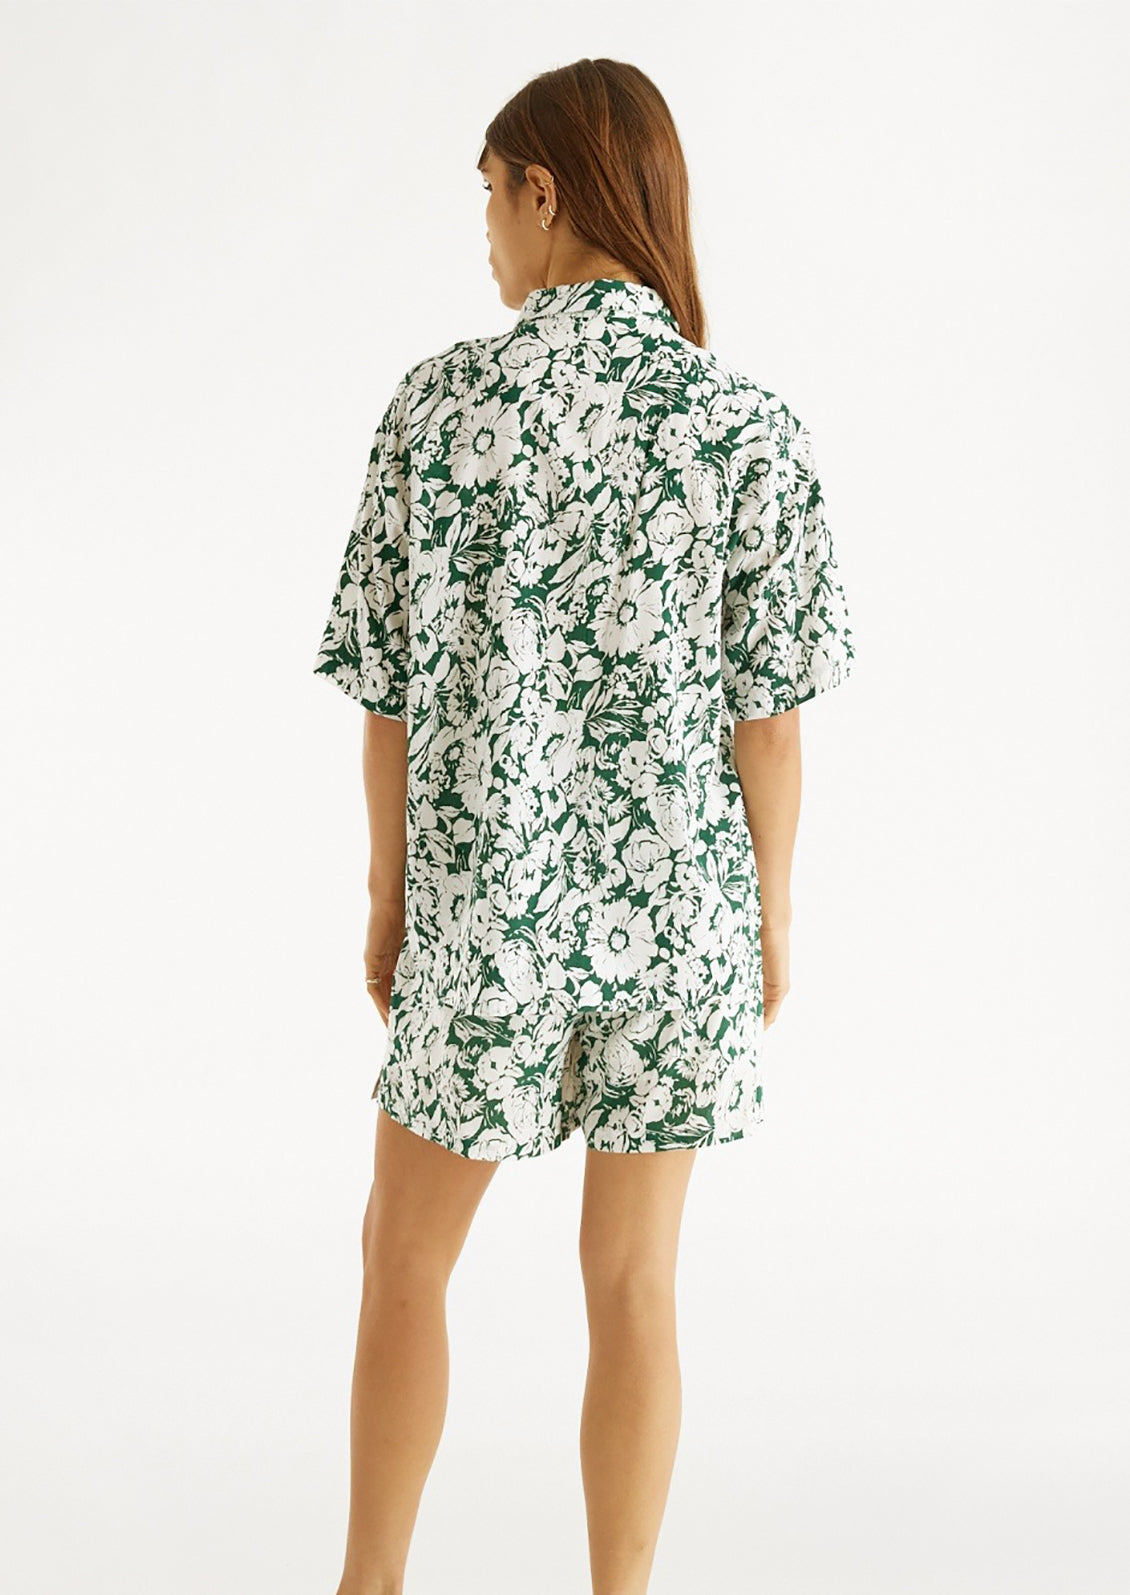 Woman wearing green and white floral printed shorts and matching shirt, seen from behind. 